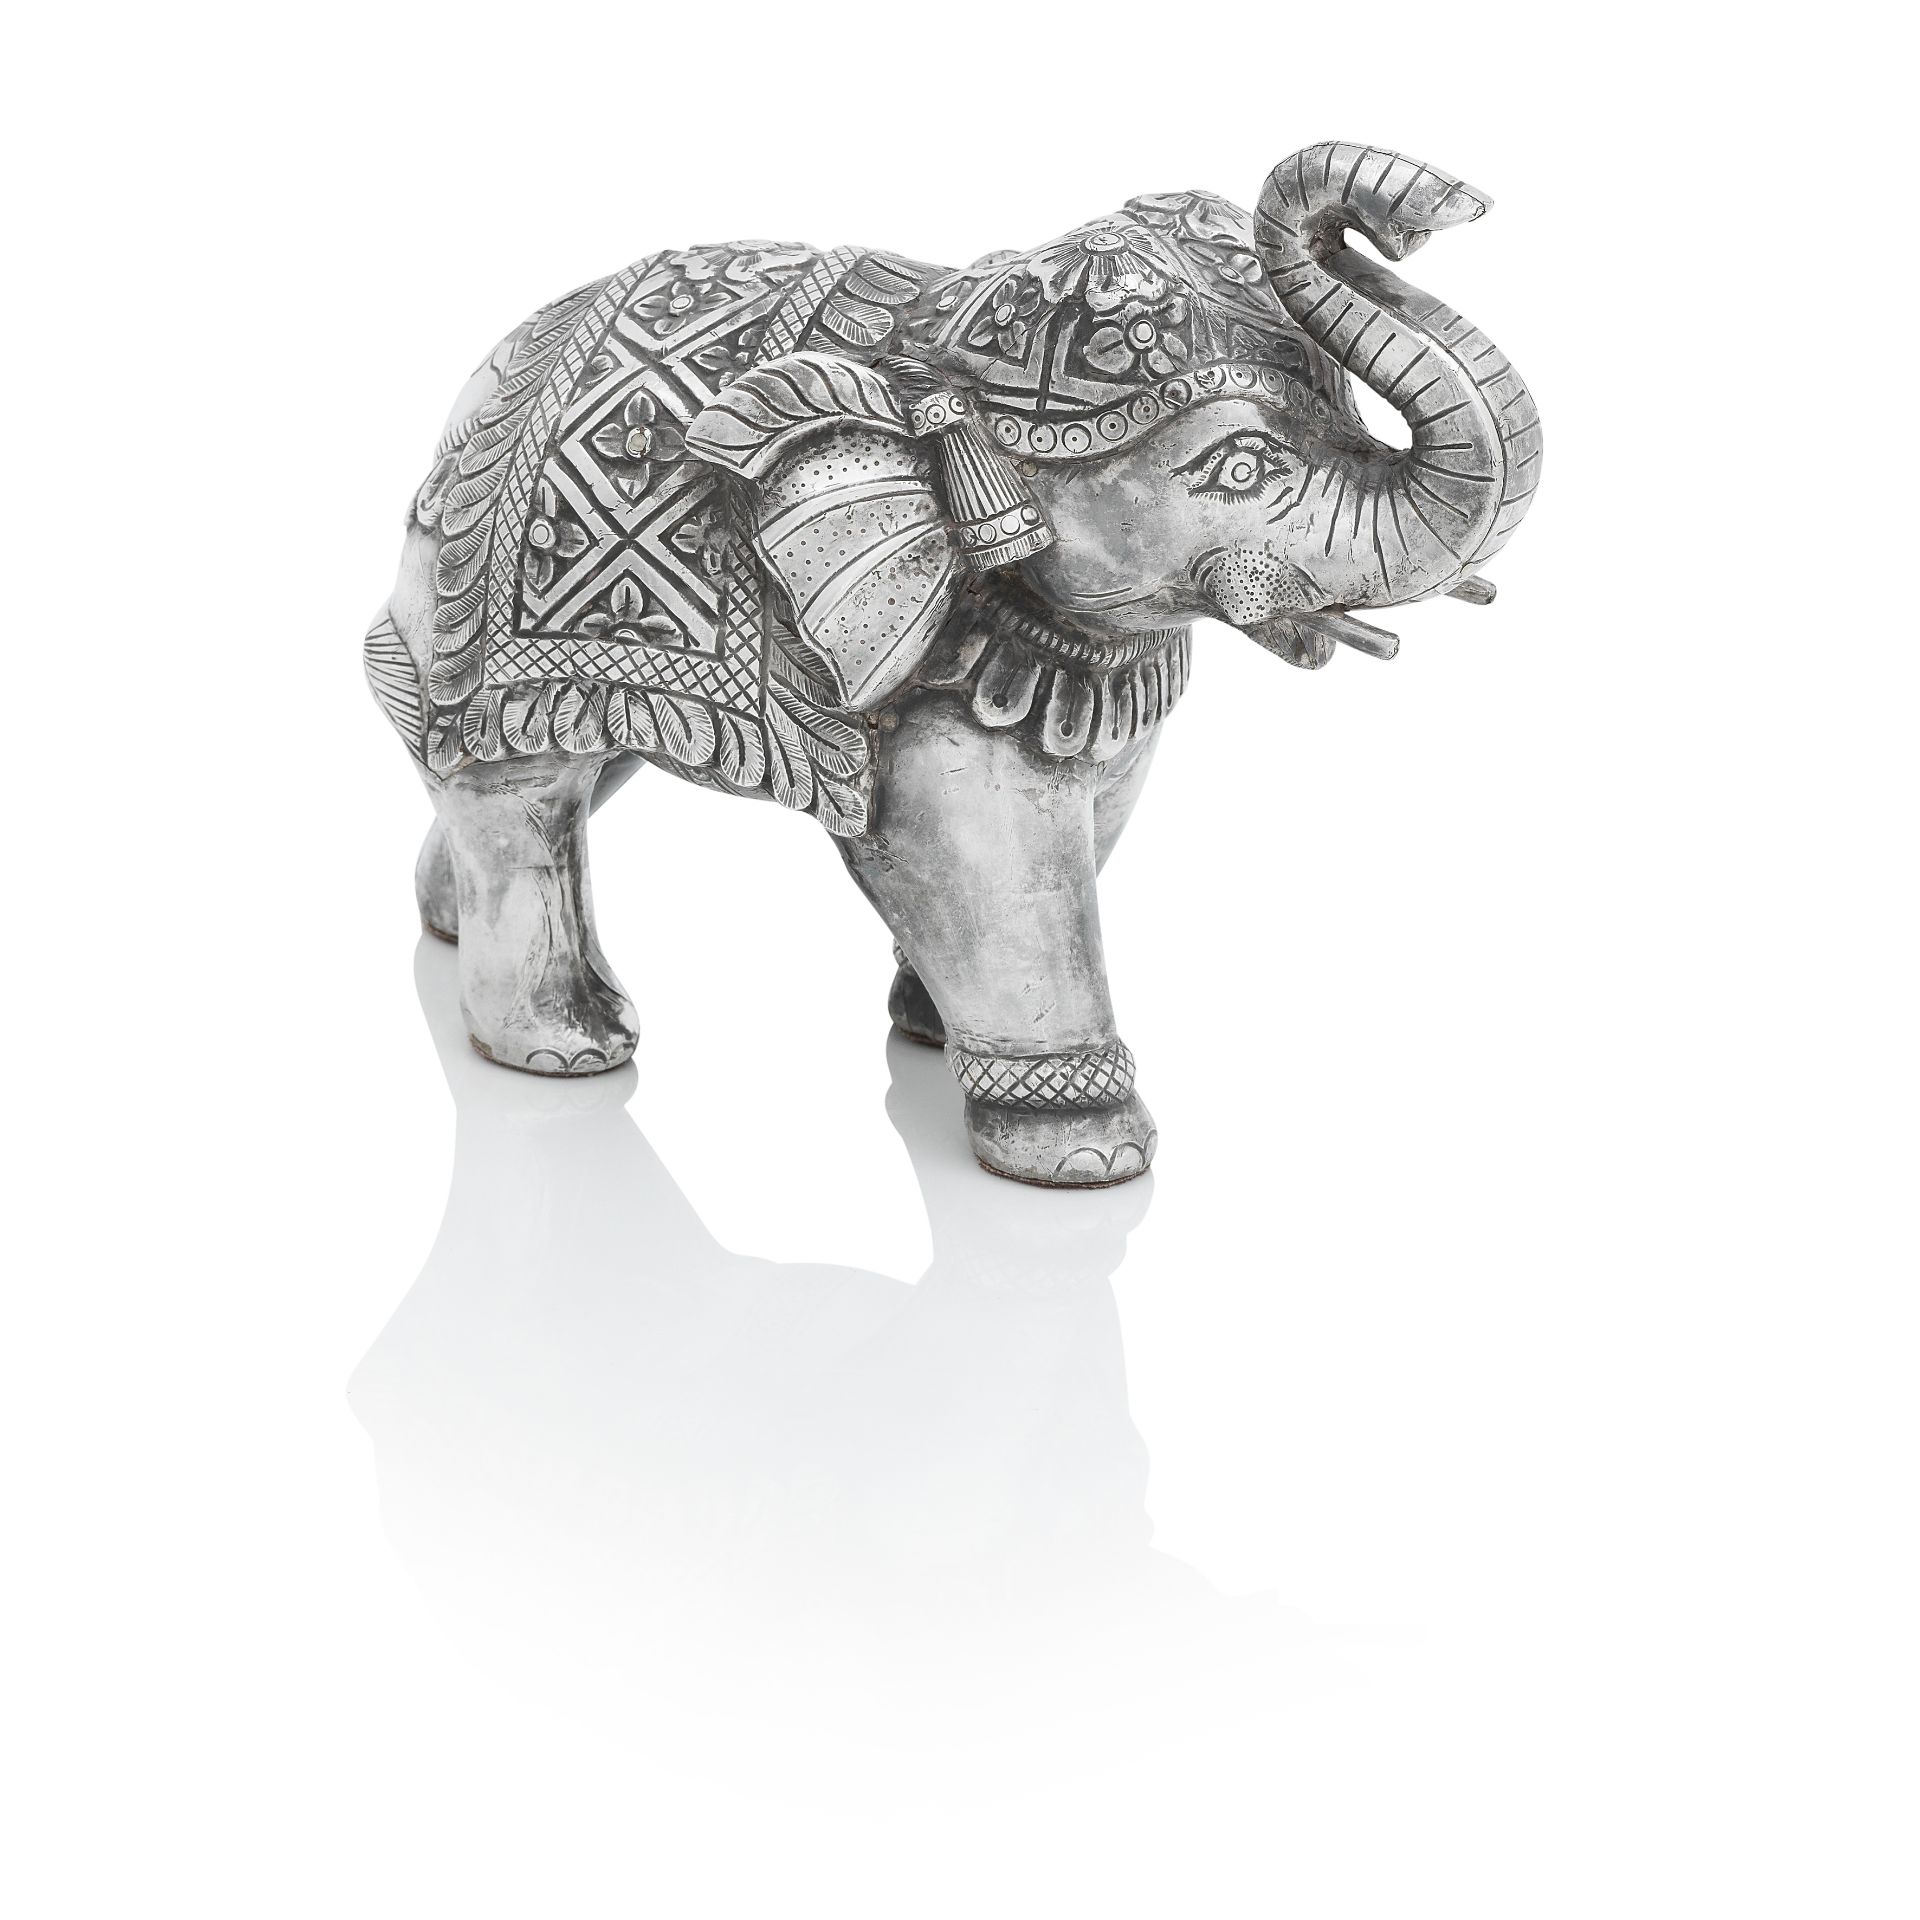 AN INDIAN SILVER-COVERED MODEL OF AN ELEPHANT 20th century